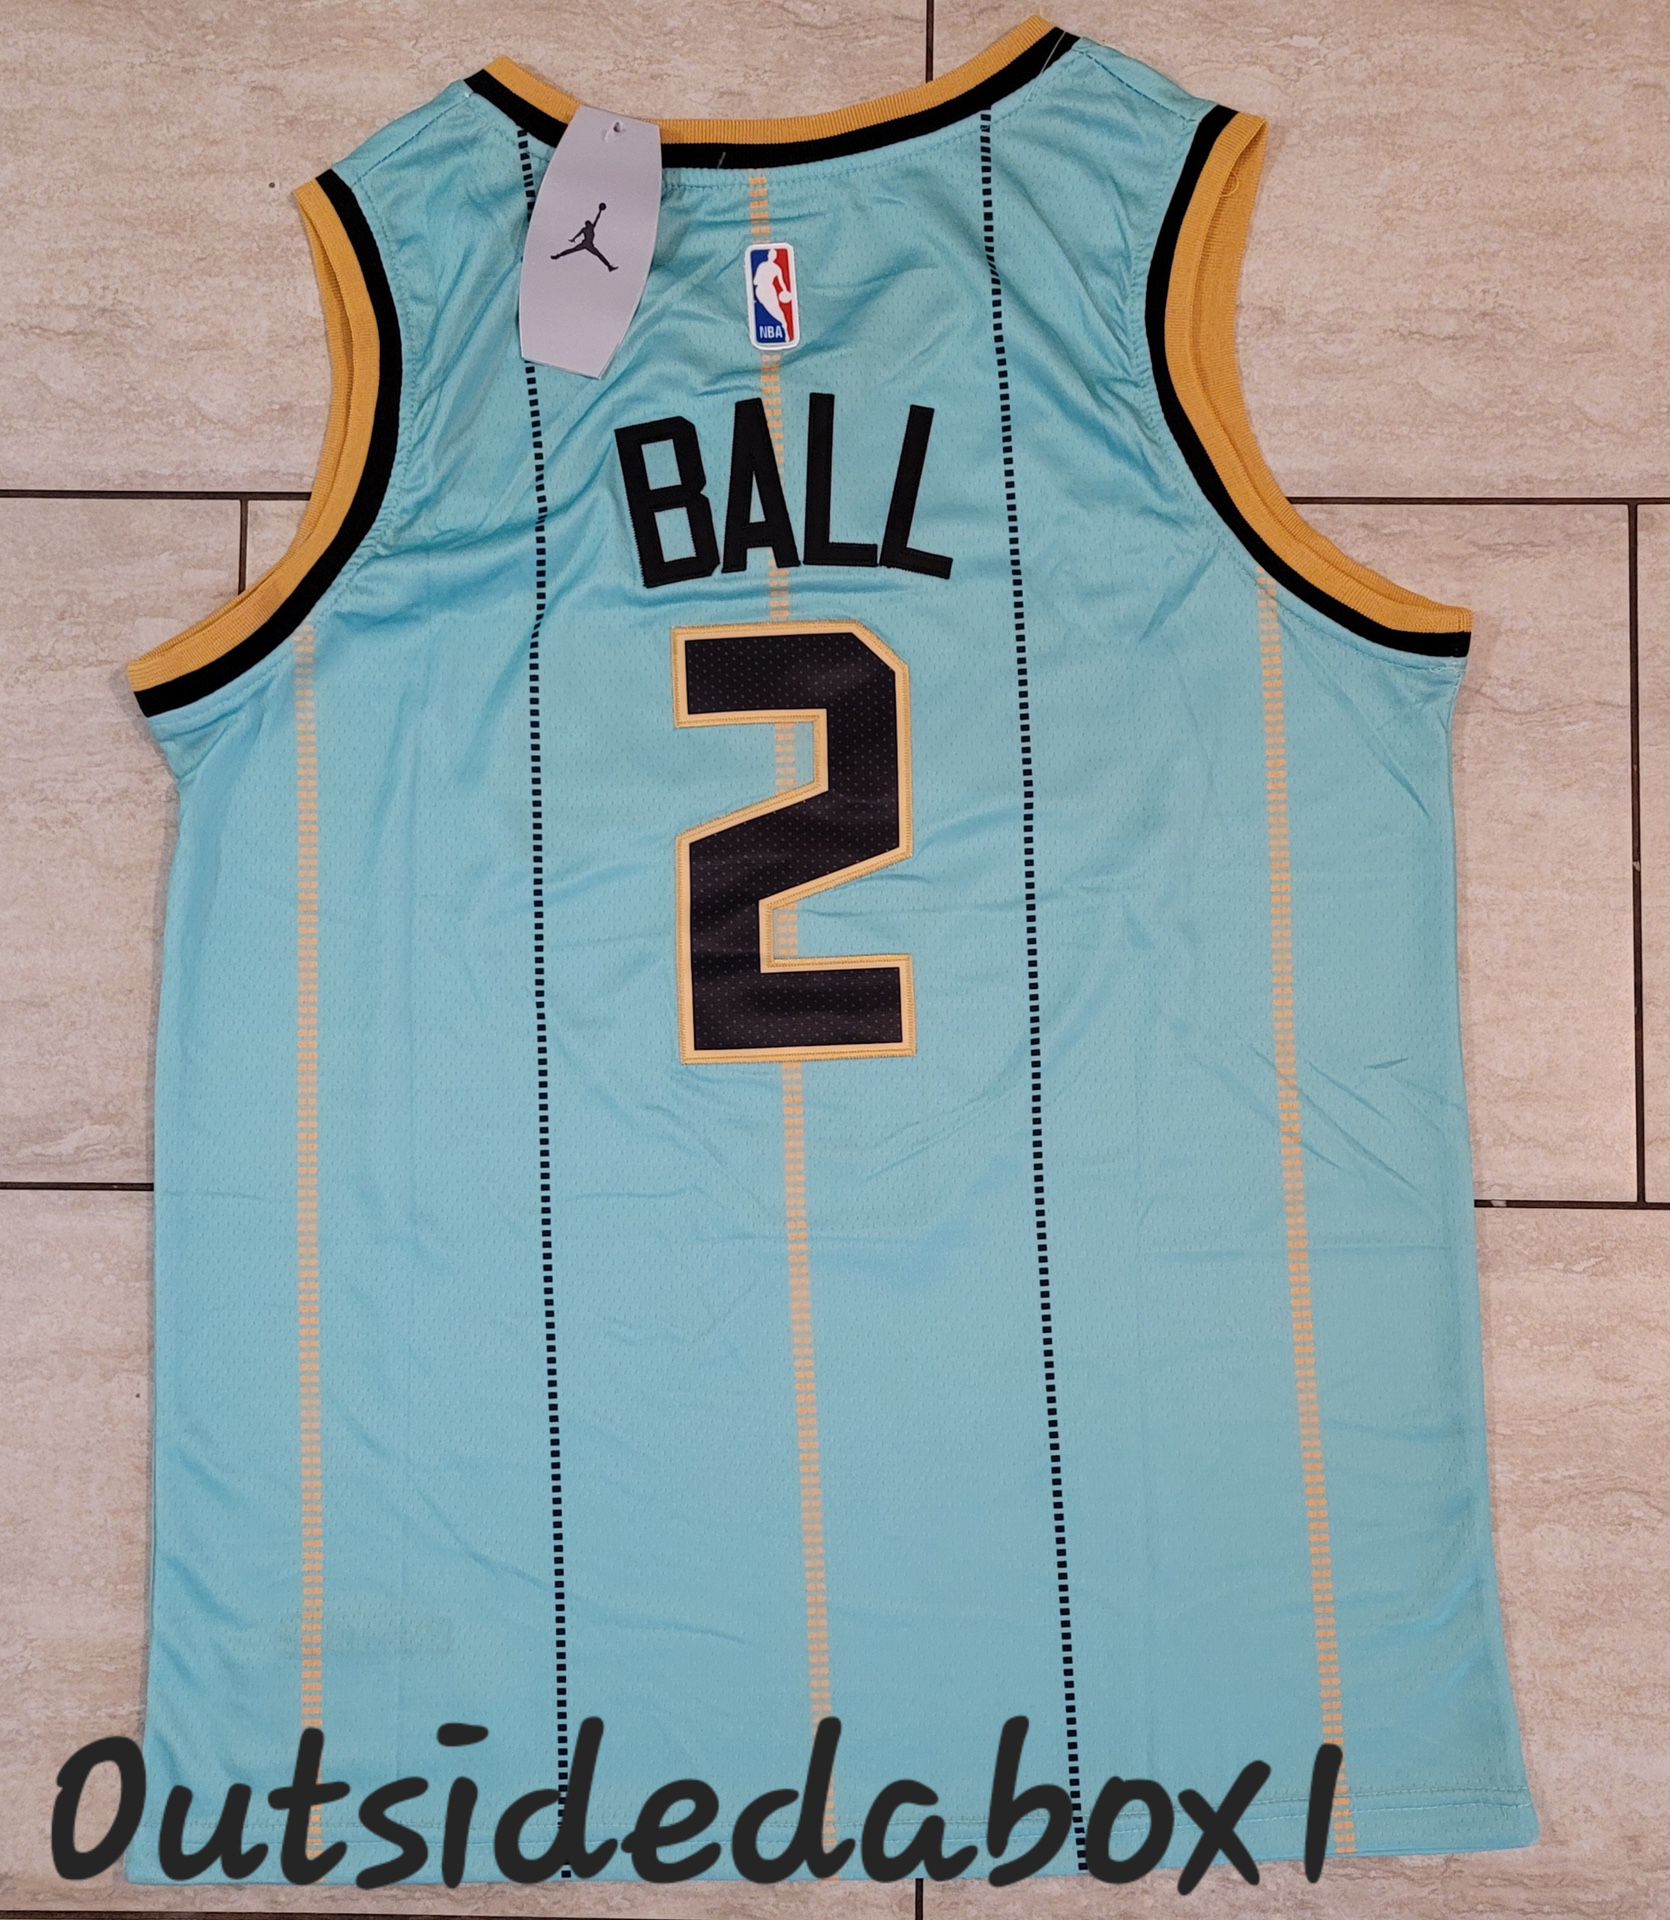 Lamelo Ball Buzz City Jersey for Sale in Winchester, CA - OfferUp